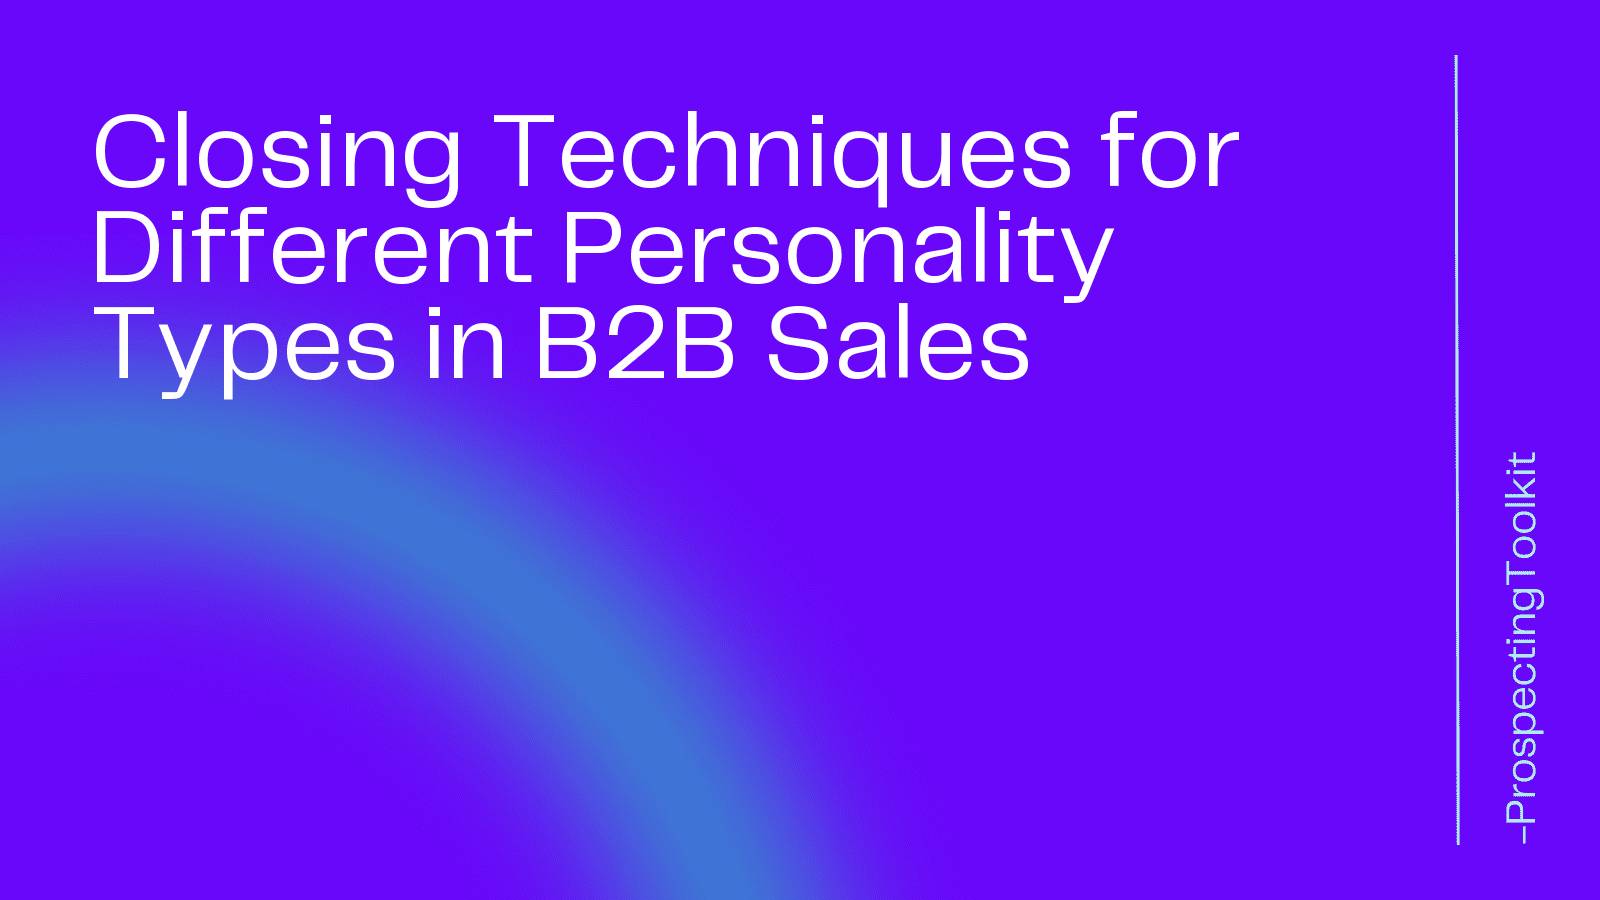 Closing Techniques for Different Personality Types in B2B Sales